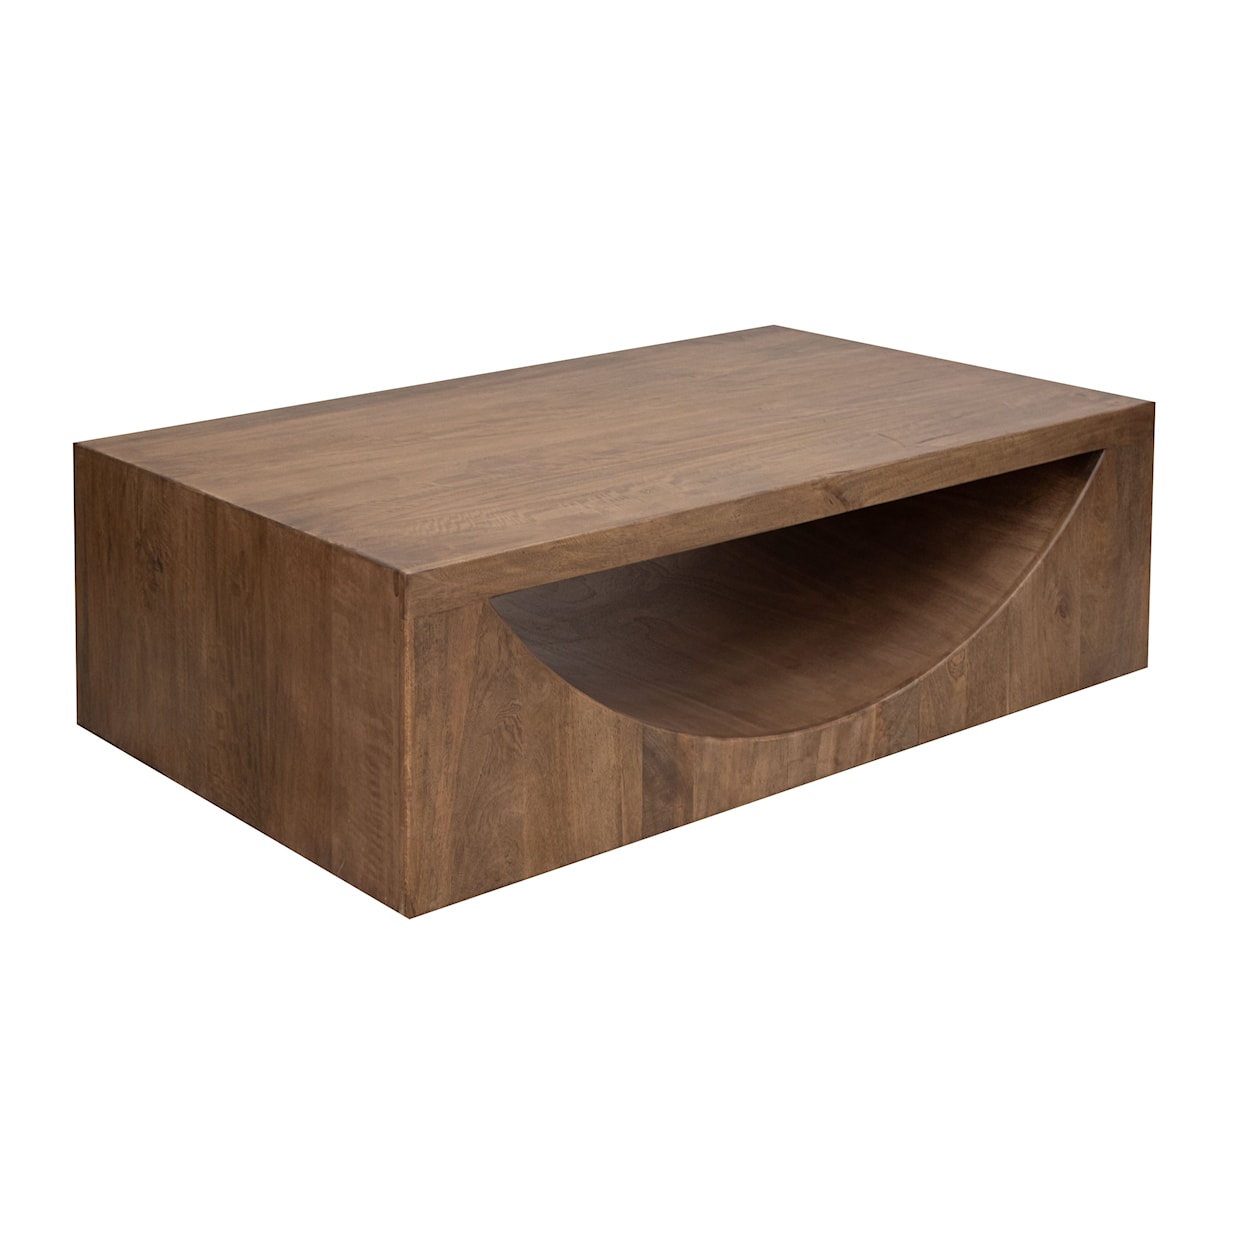 IFD International Furniture Direct Mezquite Cocktail Table